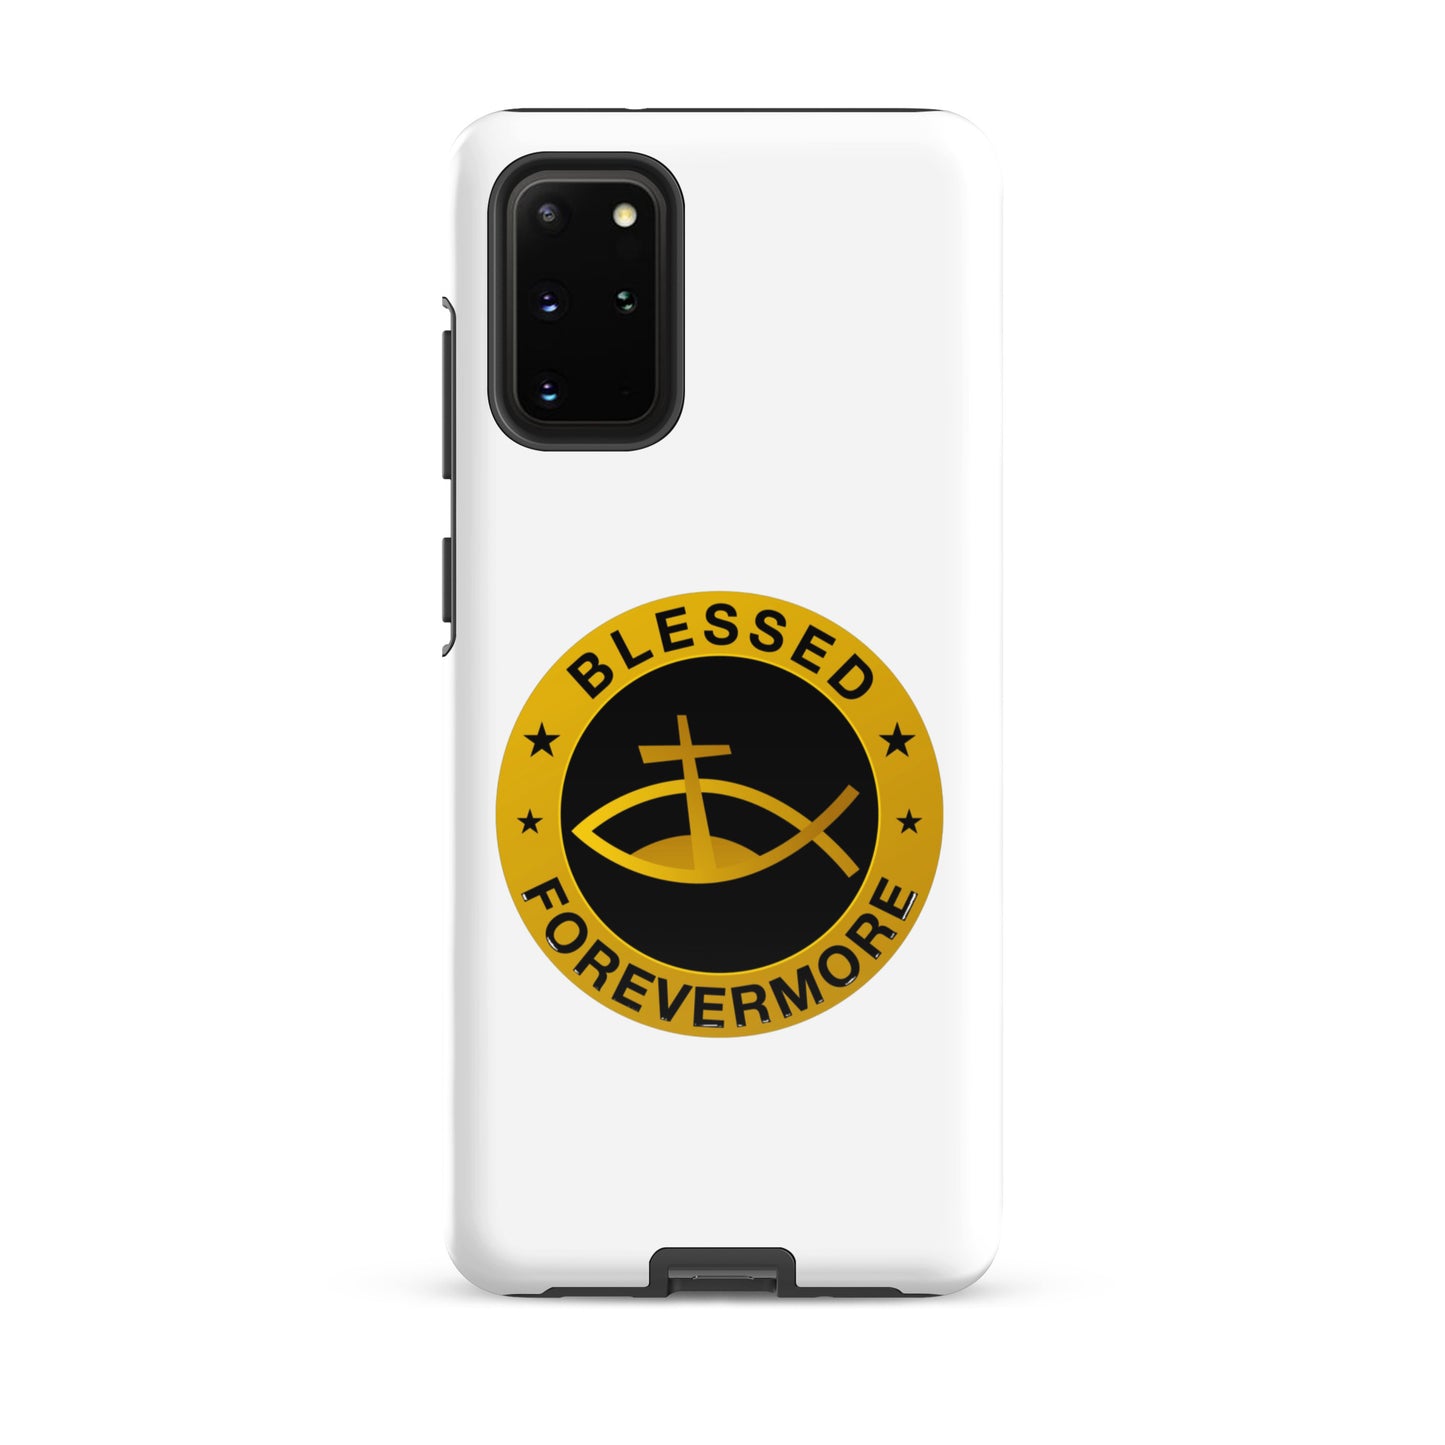 Blessed Forevermore - Tough case for Samsung®